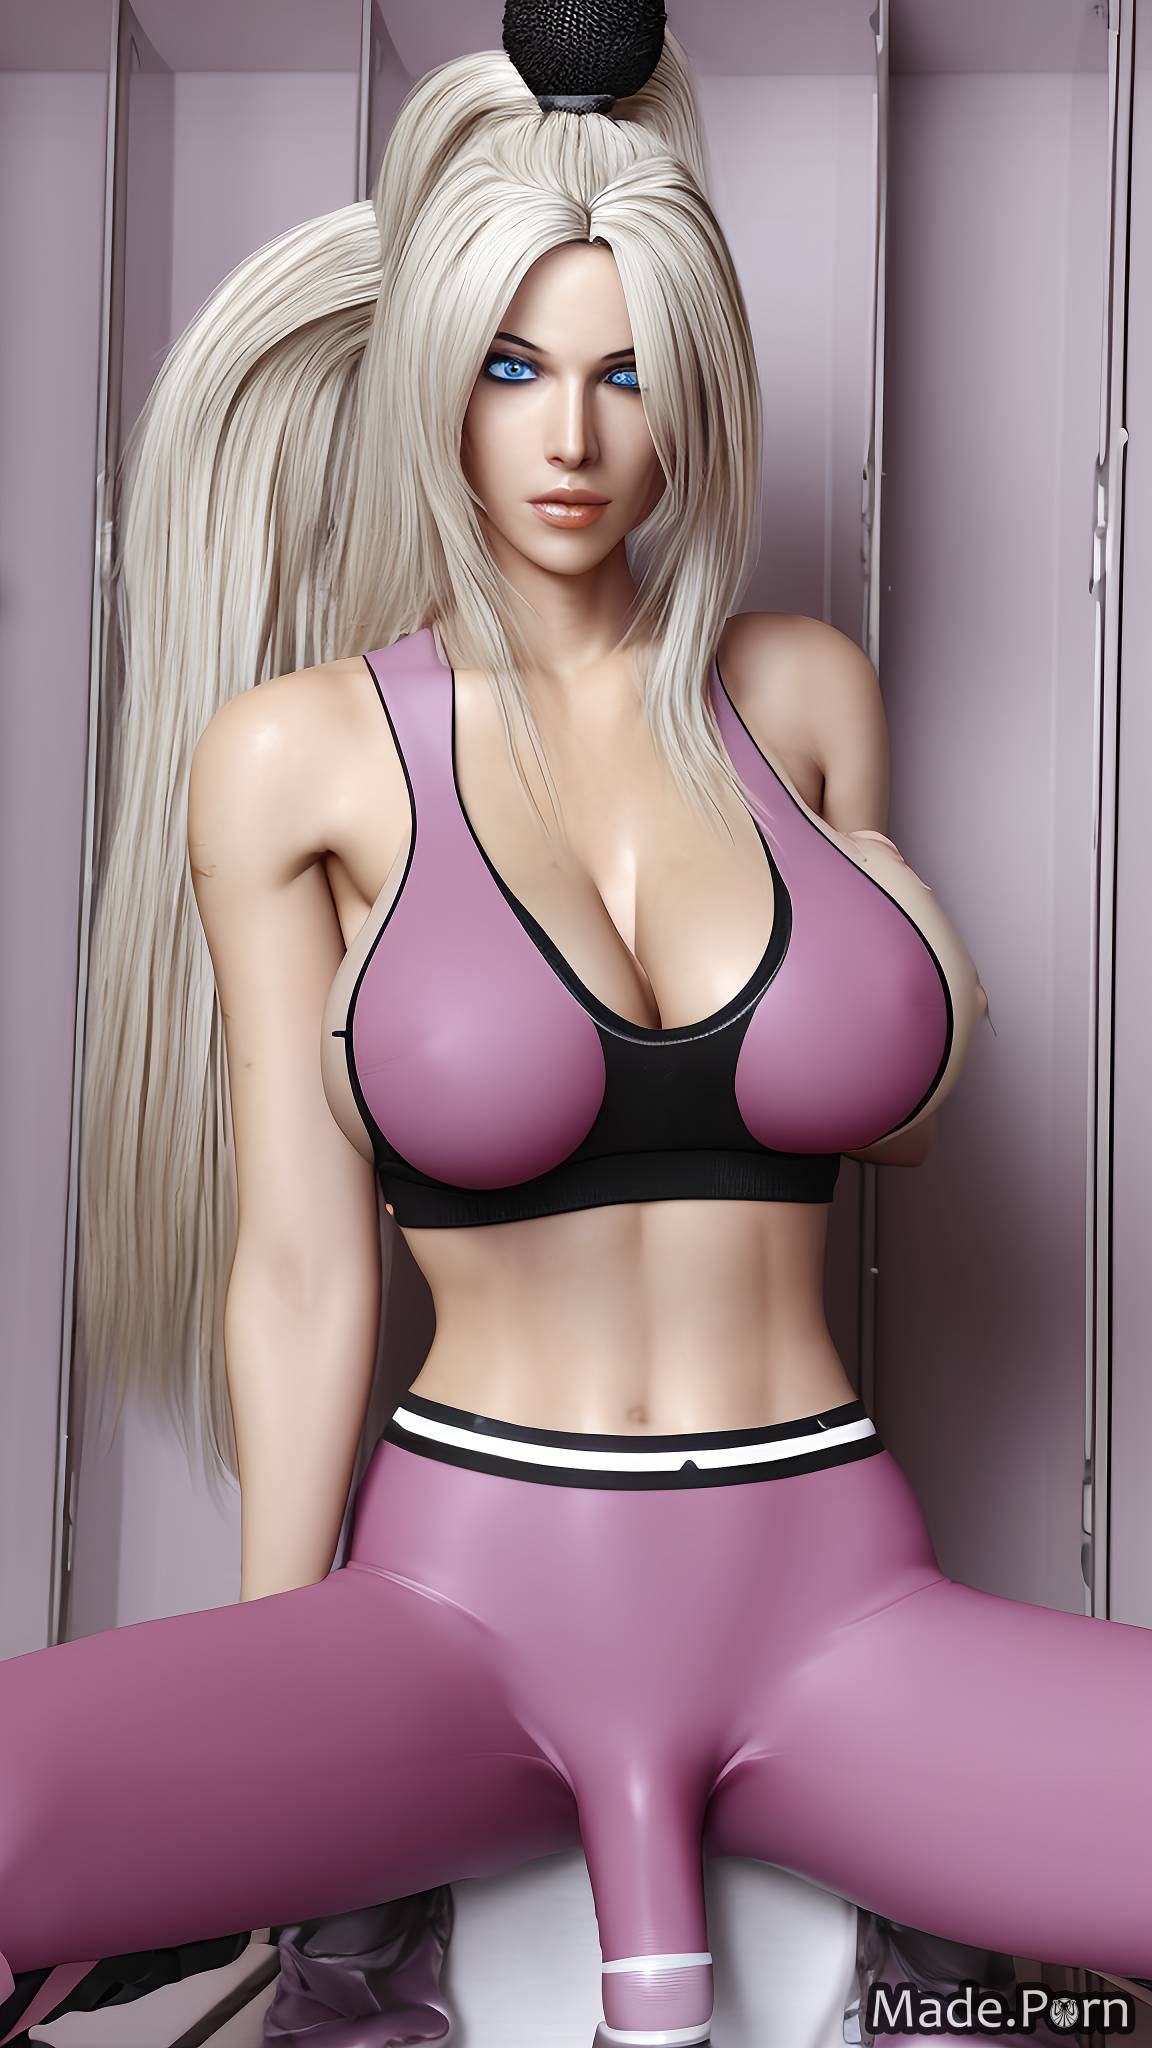 ponytail looking at viewer locker room shemale sports bra partially nude portrait